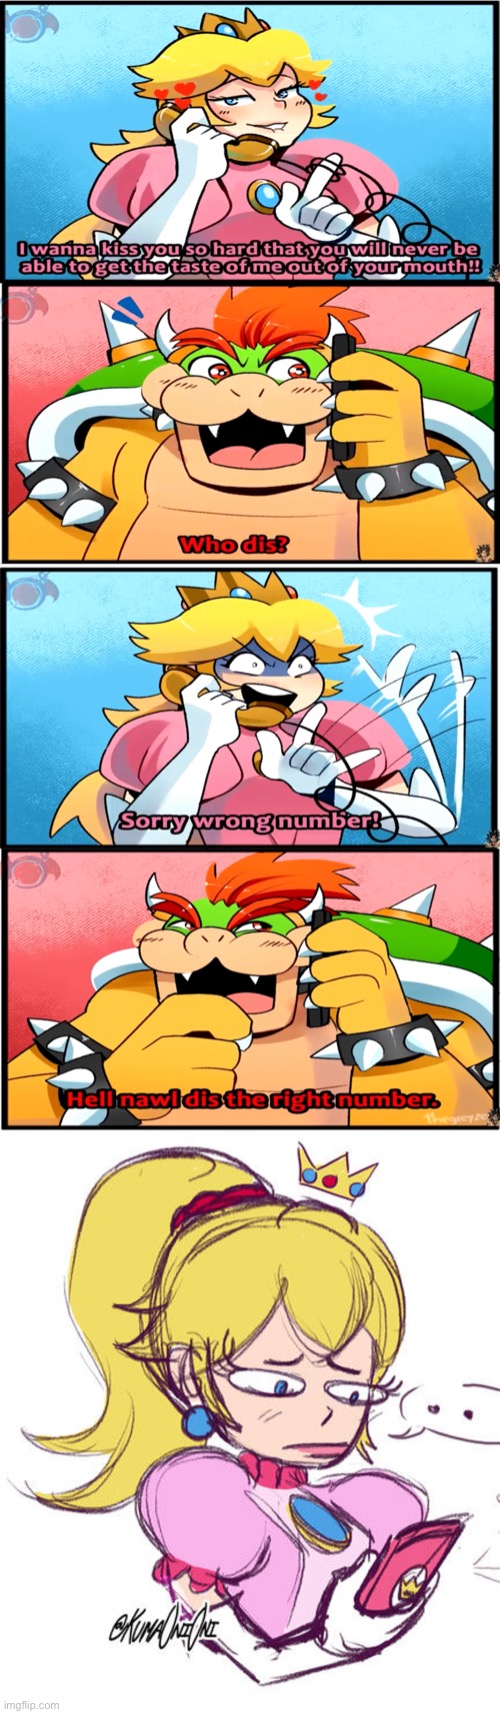 Why 39 | image tagged in bowser,princess peach,nintendo | made w/ Imgflip meme maker